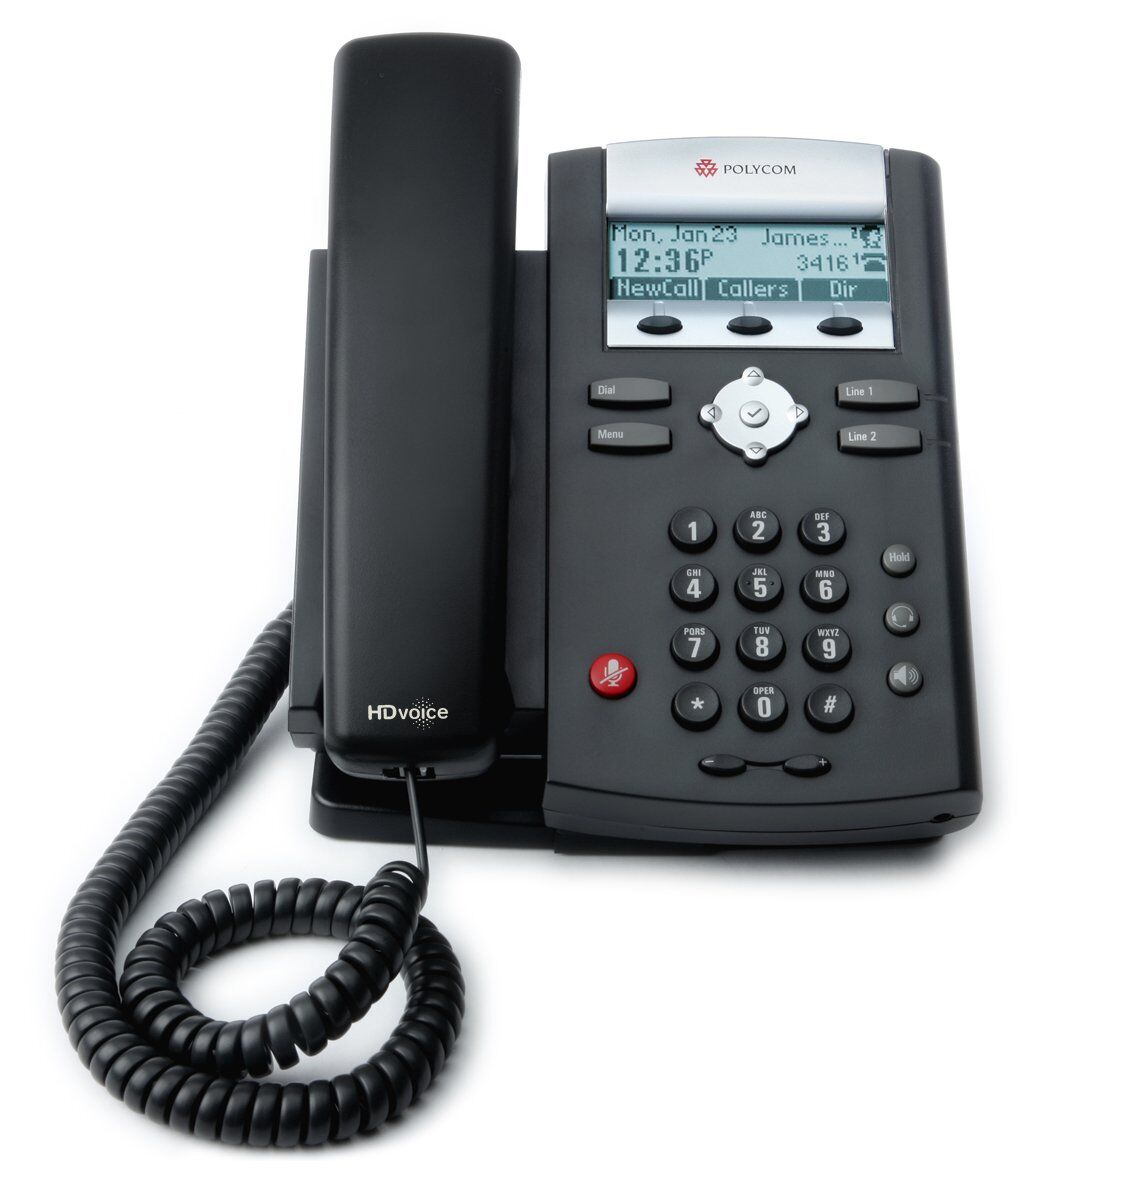 Polycom IP 335 VoIP PoE Phone (2200-12375-001) Fully Refurbished